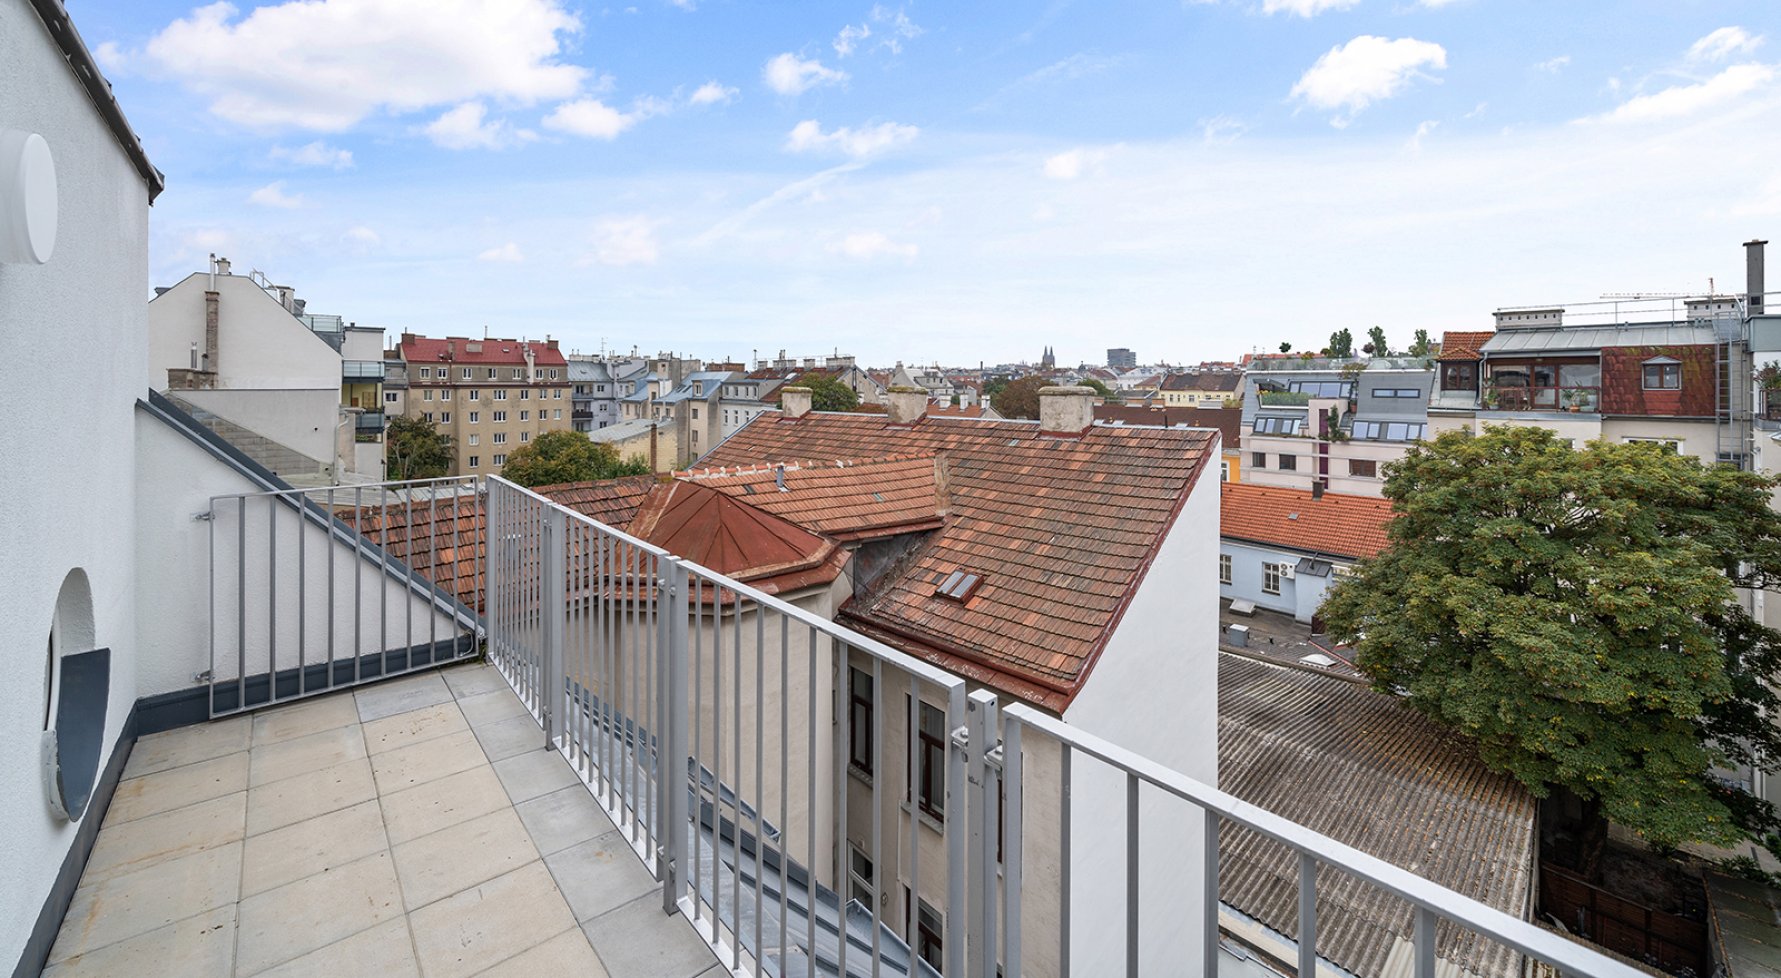 Property in 1170 Wien, 17. Bezirk: 2 room attic apartment in renovated old building with outdoor space - picture 1